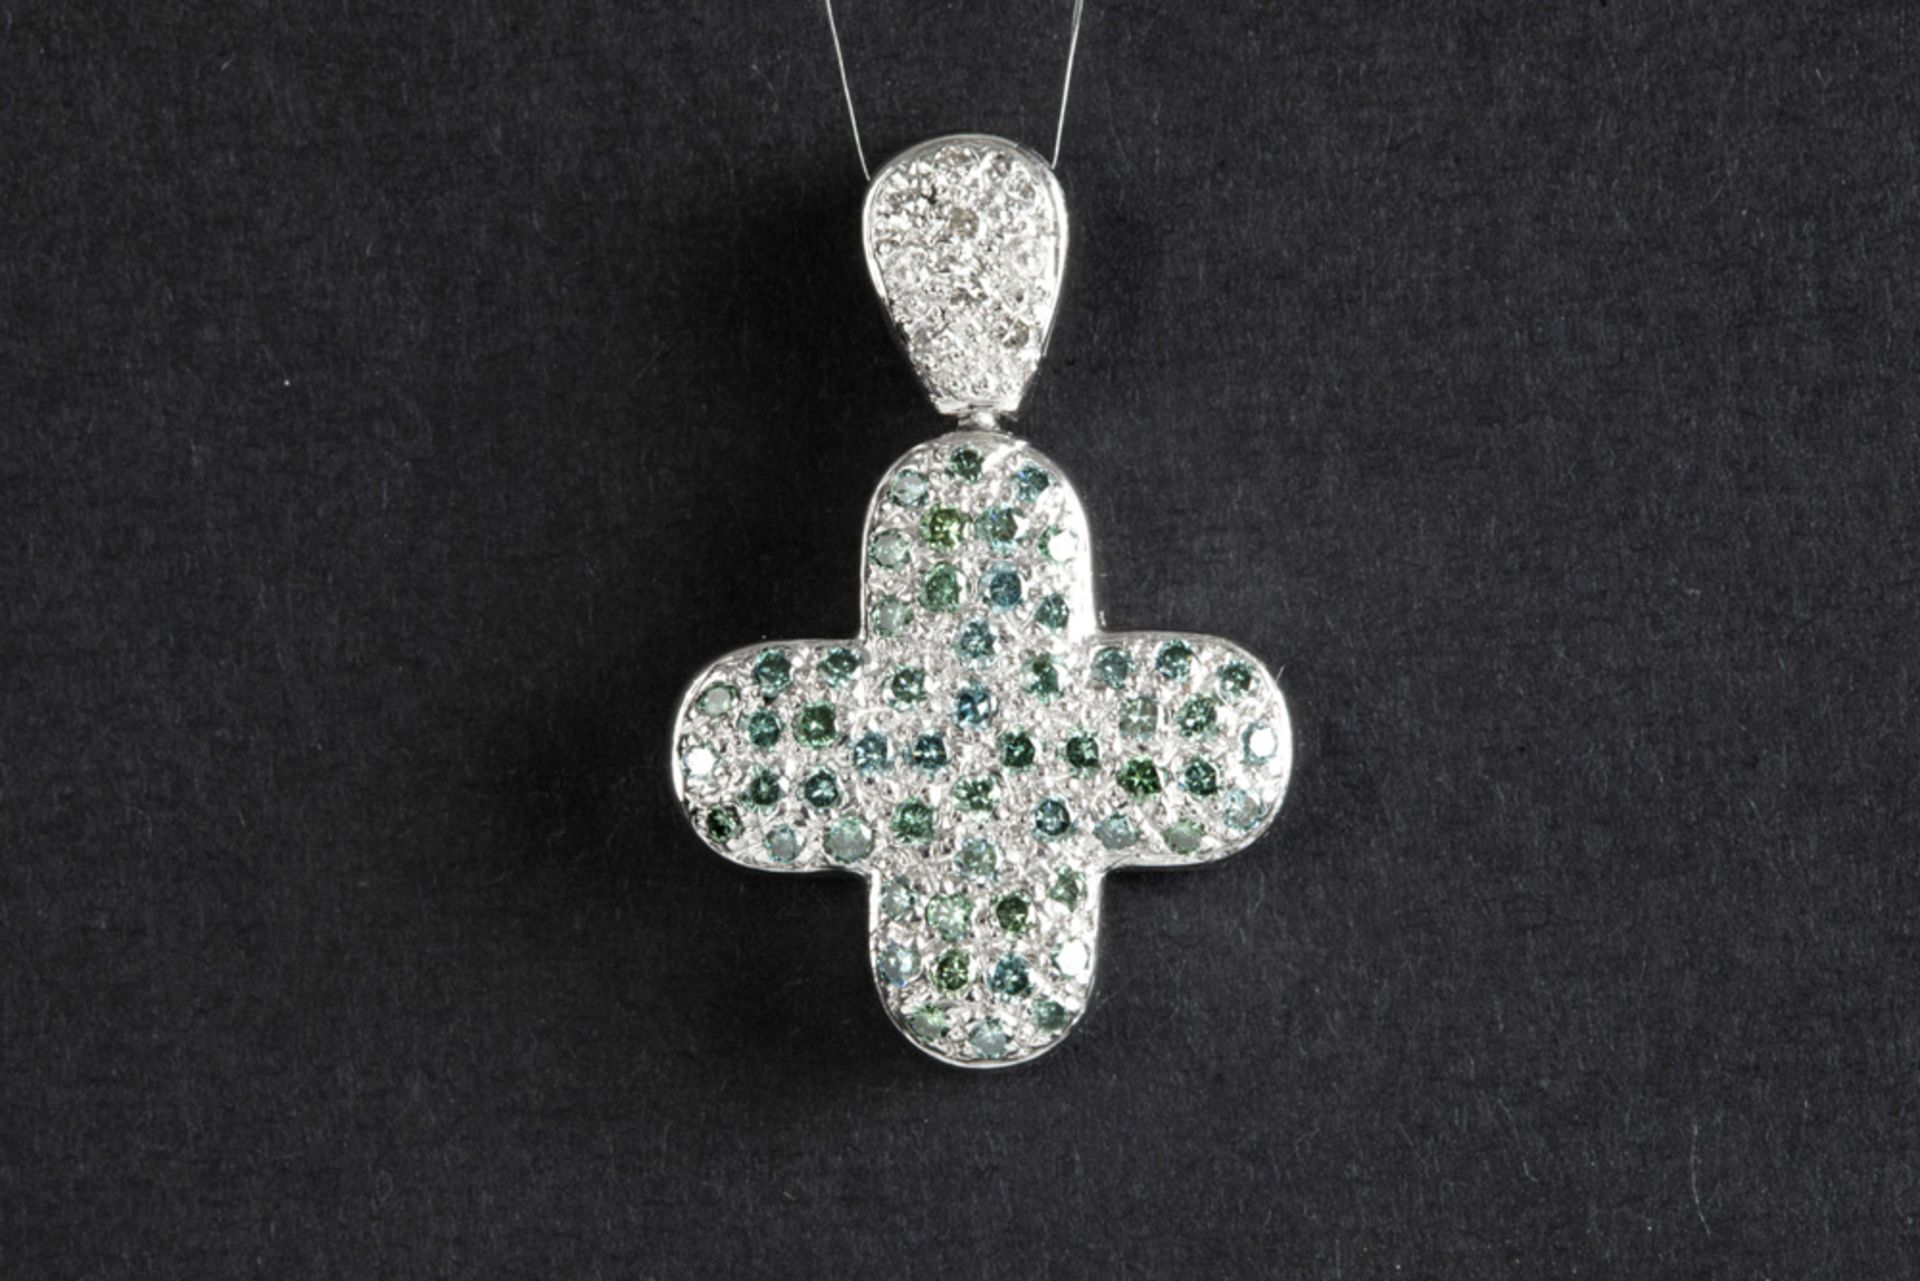 cross-shaped pendant in white gold (18 carat) with ca 0,60 carat of white and fancy blue quality